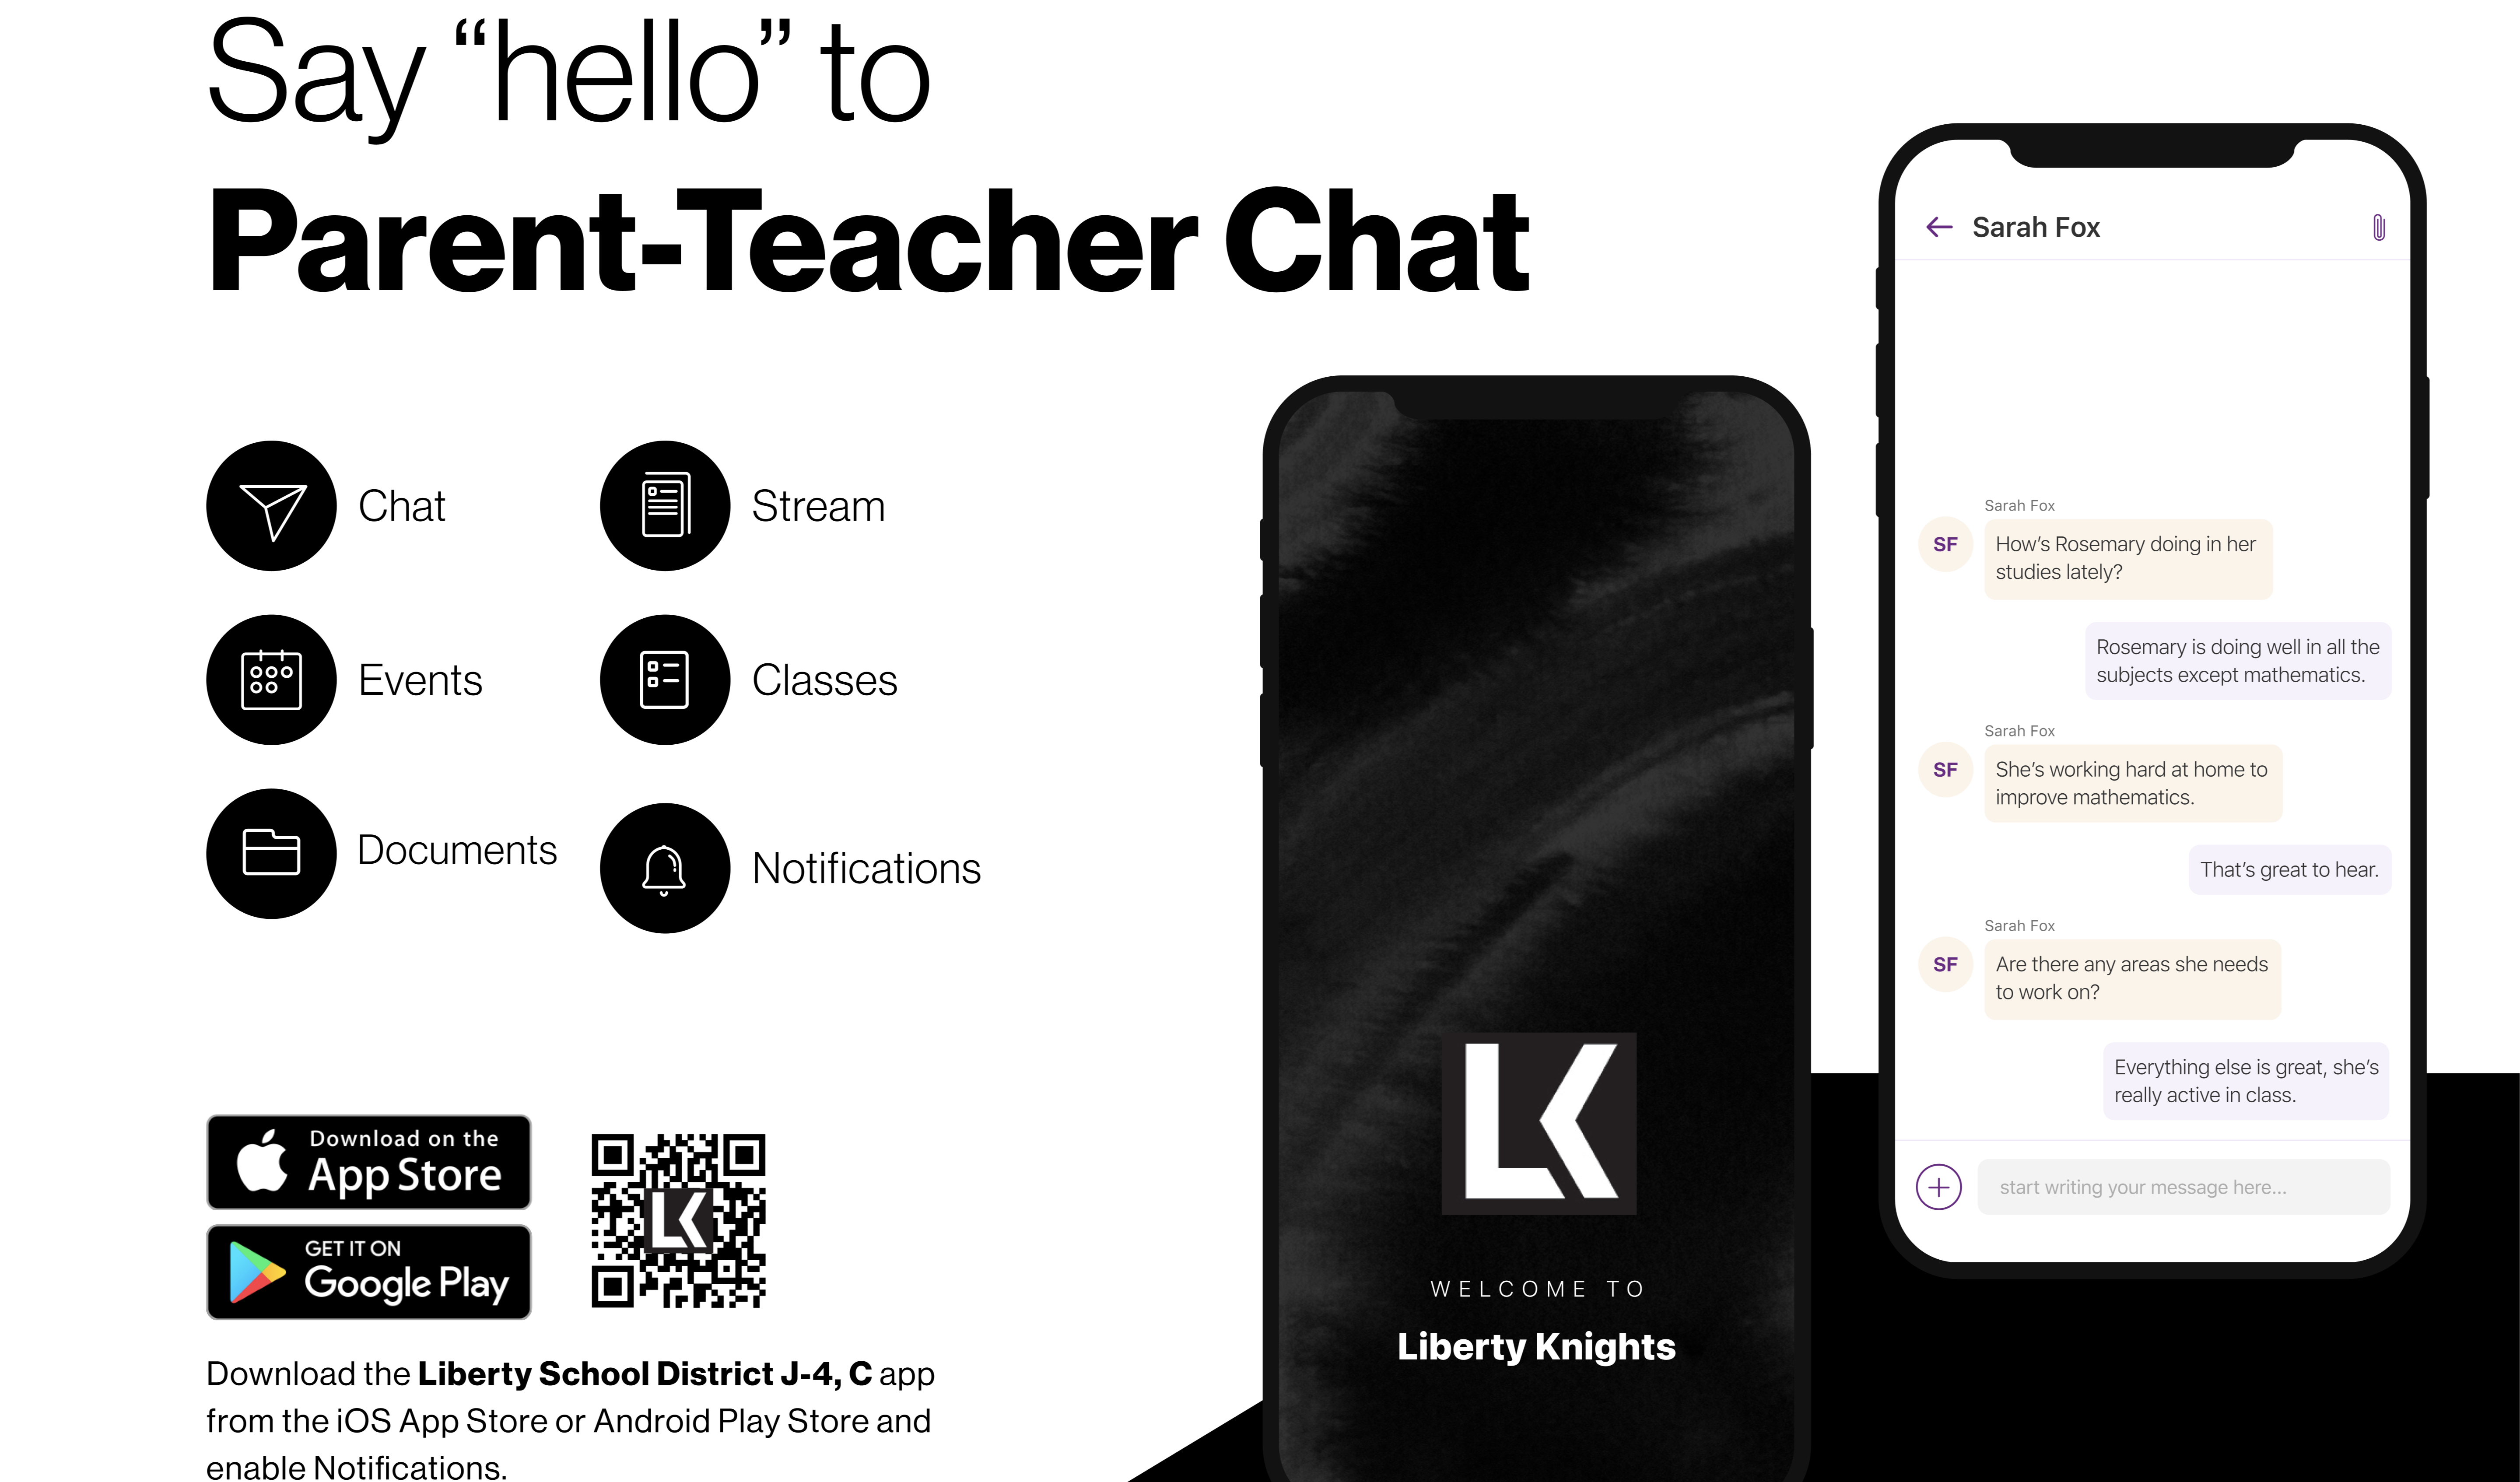 say hello to parent teacher chat - marketing materials for the district's app